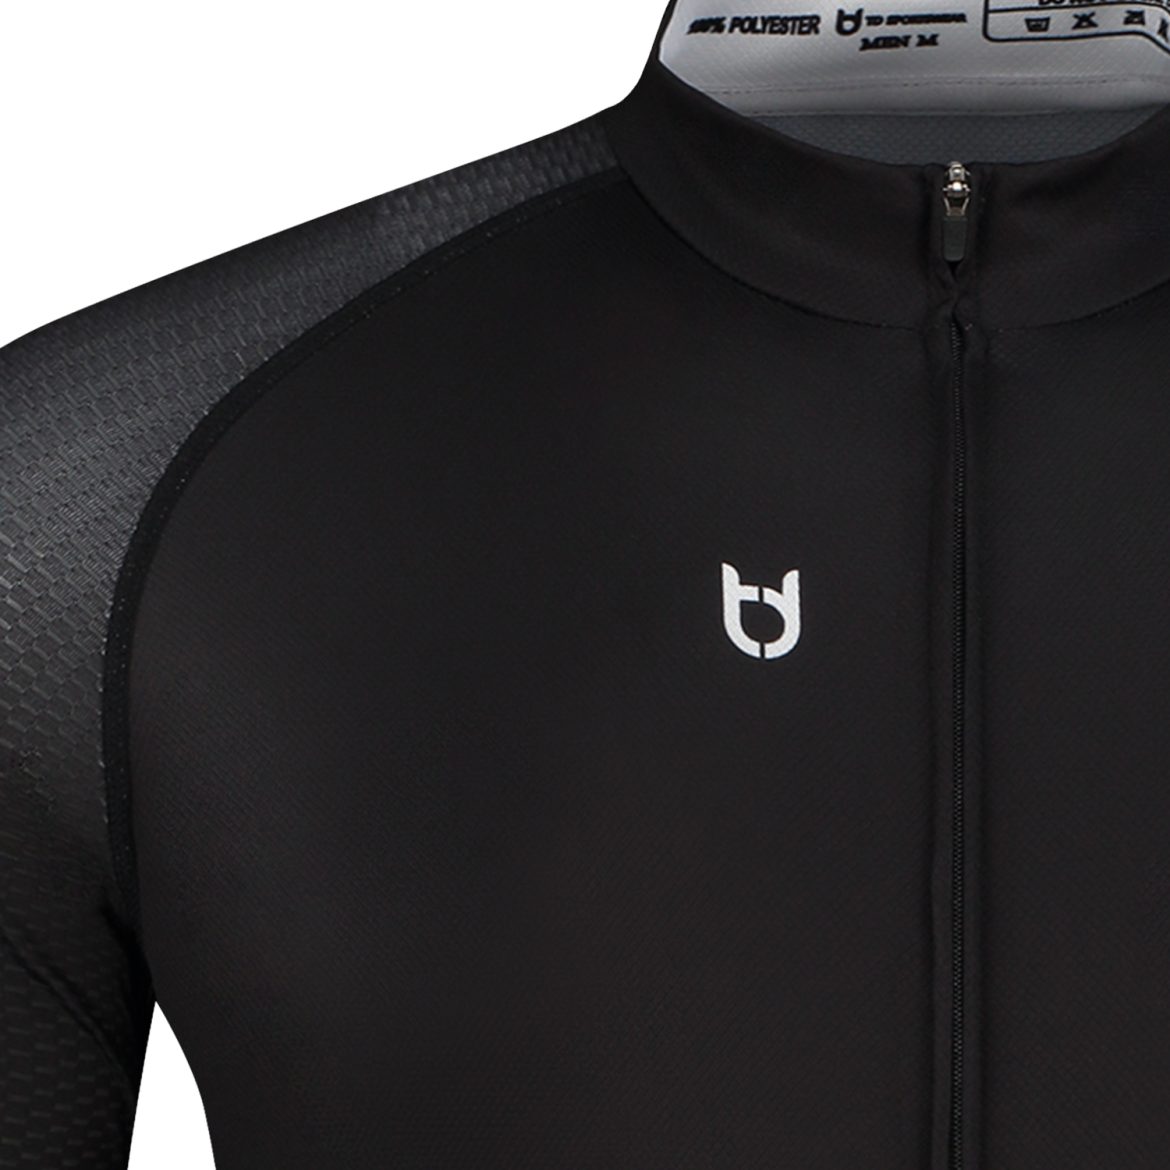 Detail shoulder material and fabrics of black cycling jersey TD